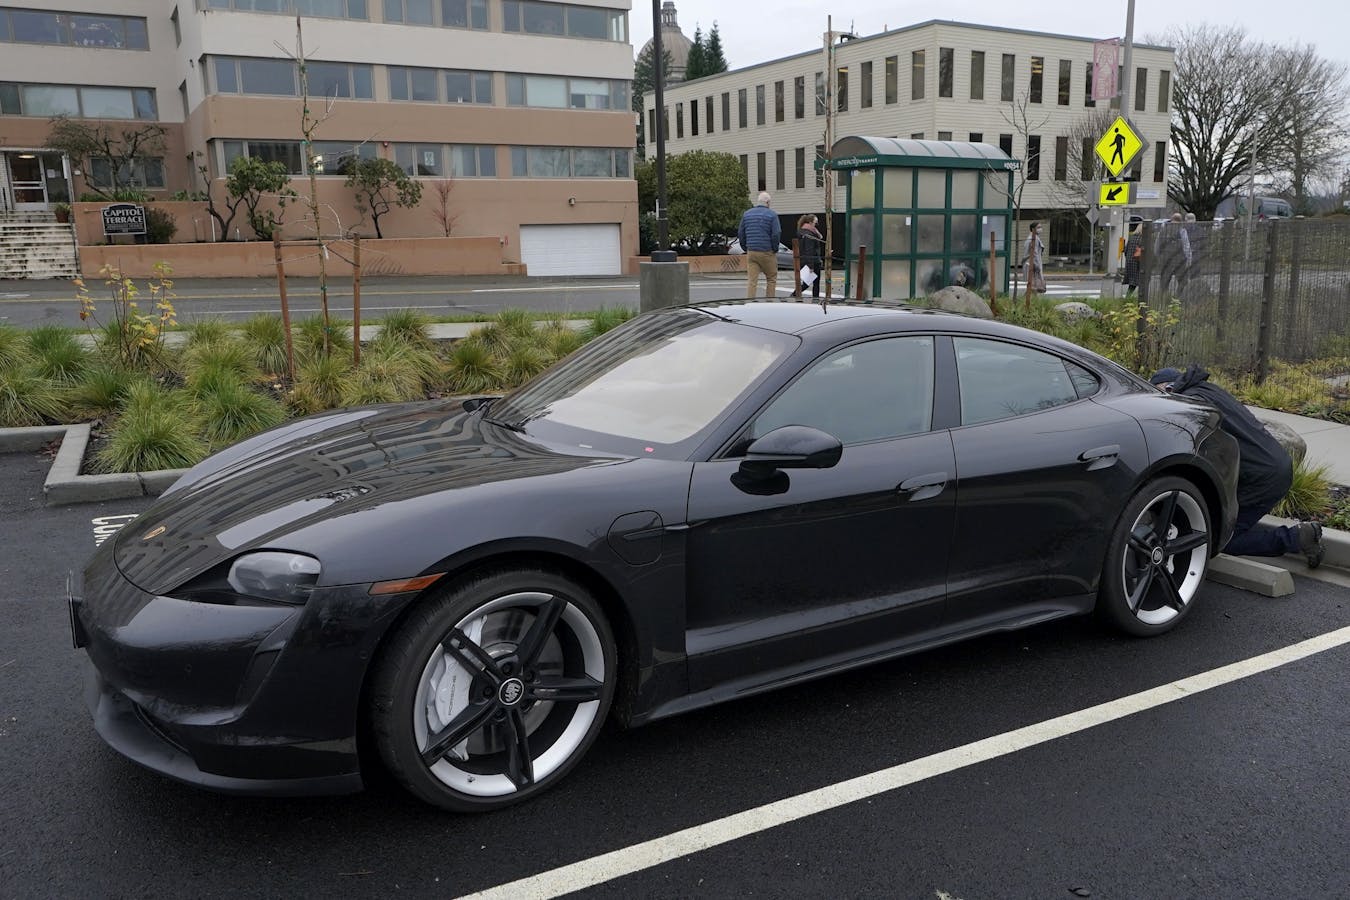 With a fully silicon anode, the Porsche Taycan would get about 270 miles on a charge, up from 225 without one. Photo: Ted S. Warren/AP 